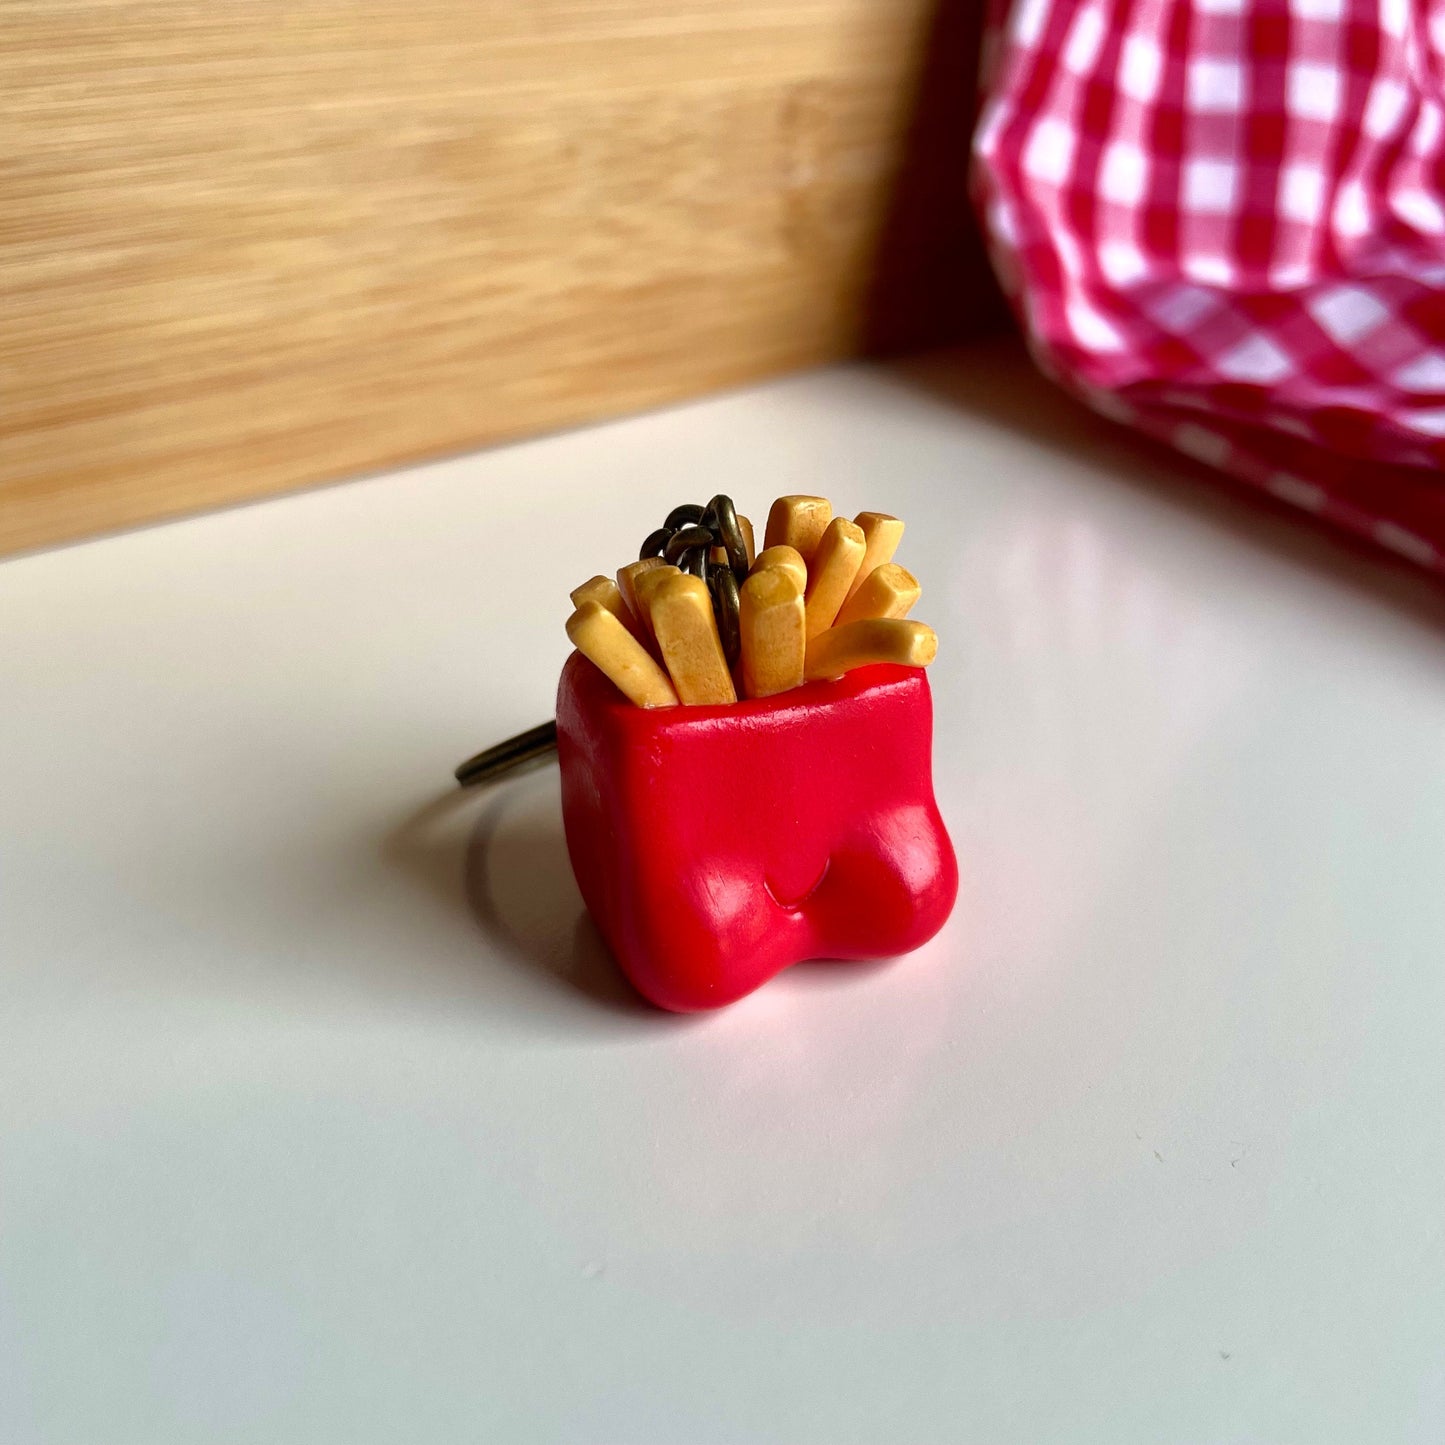 French fries keychain, fries, chips charm, keyring, cute novelty keychain, polymerclay charm, clay keyring, realistic food, miniature food